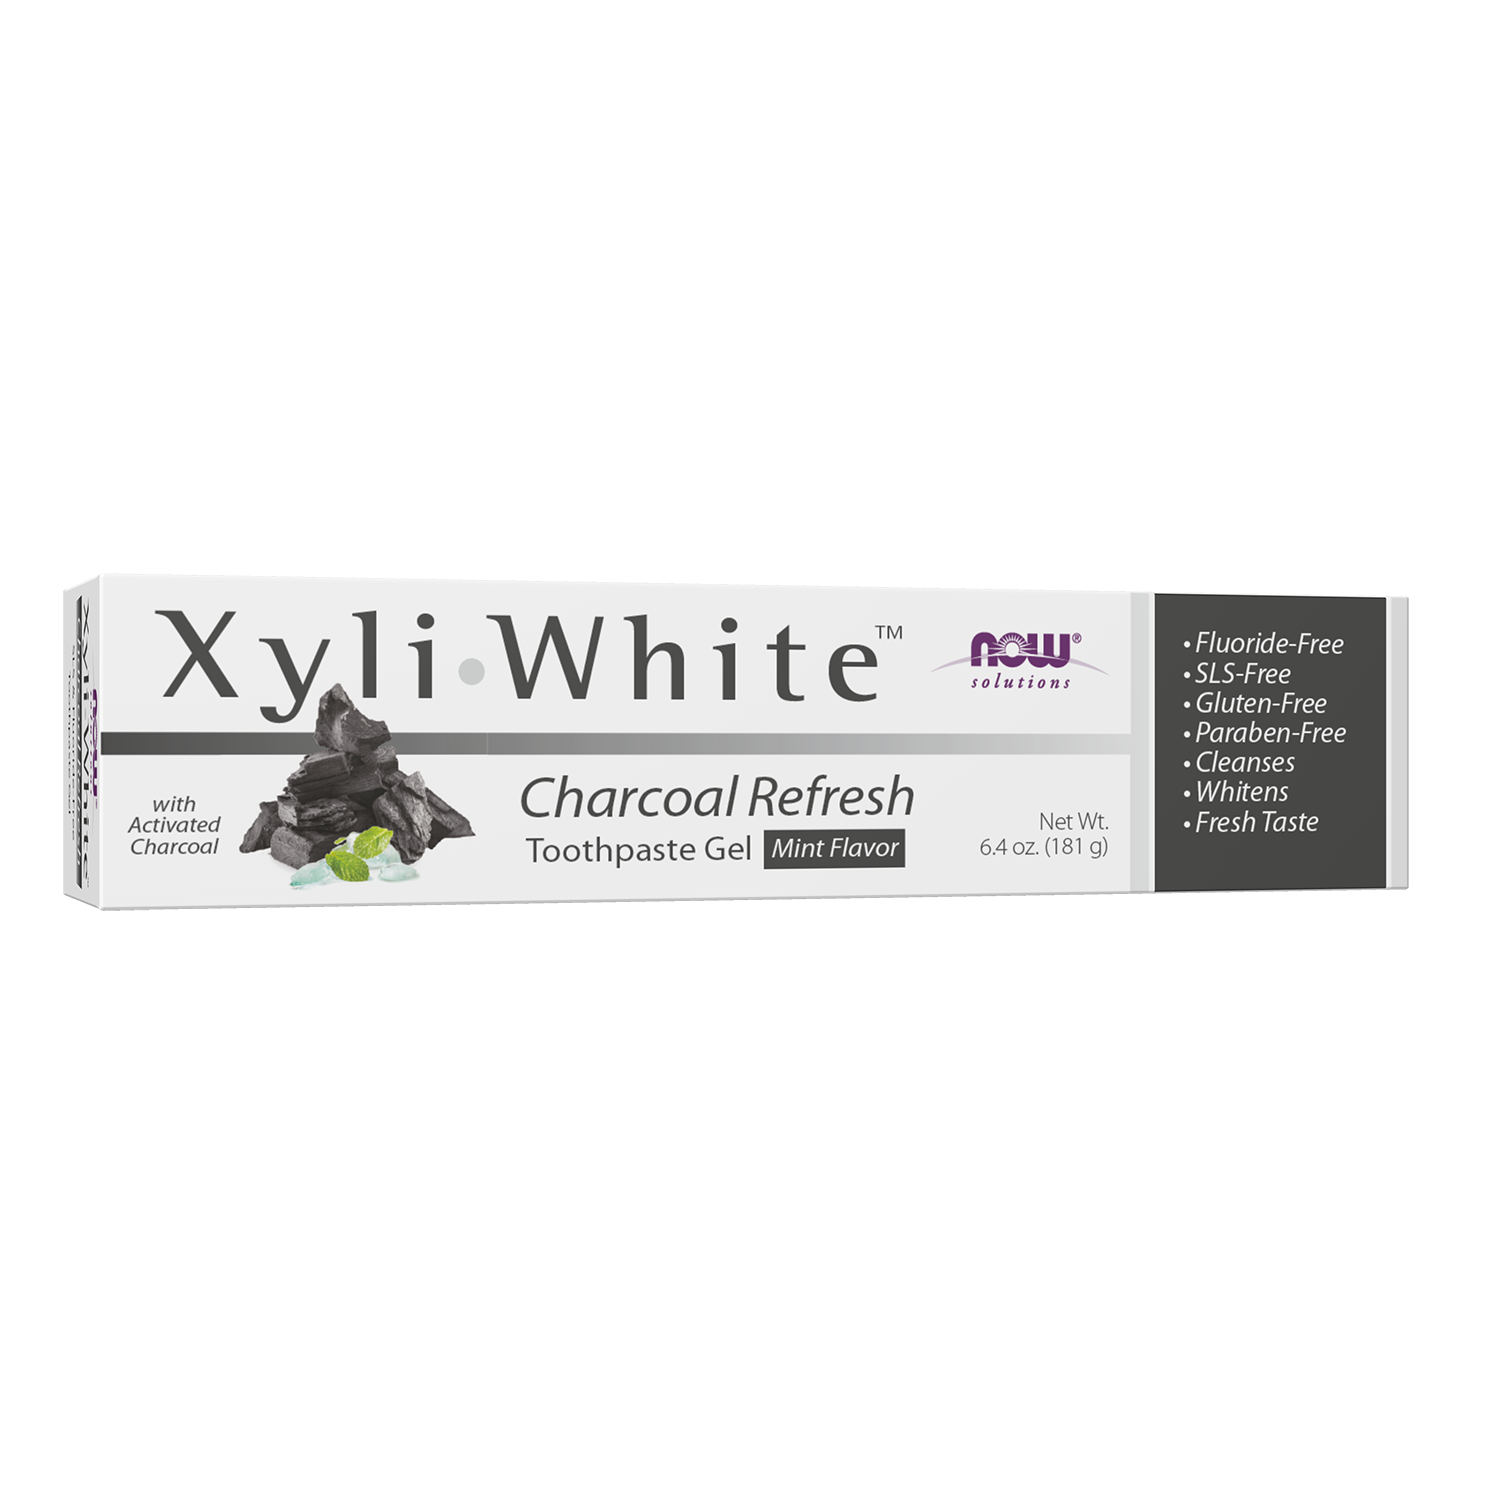 XyliWhite™ Charcoal Refresh Toothpaste Gel - 6.4 oz. Box Front